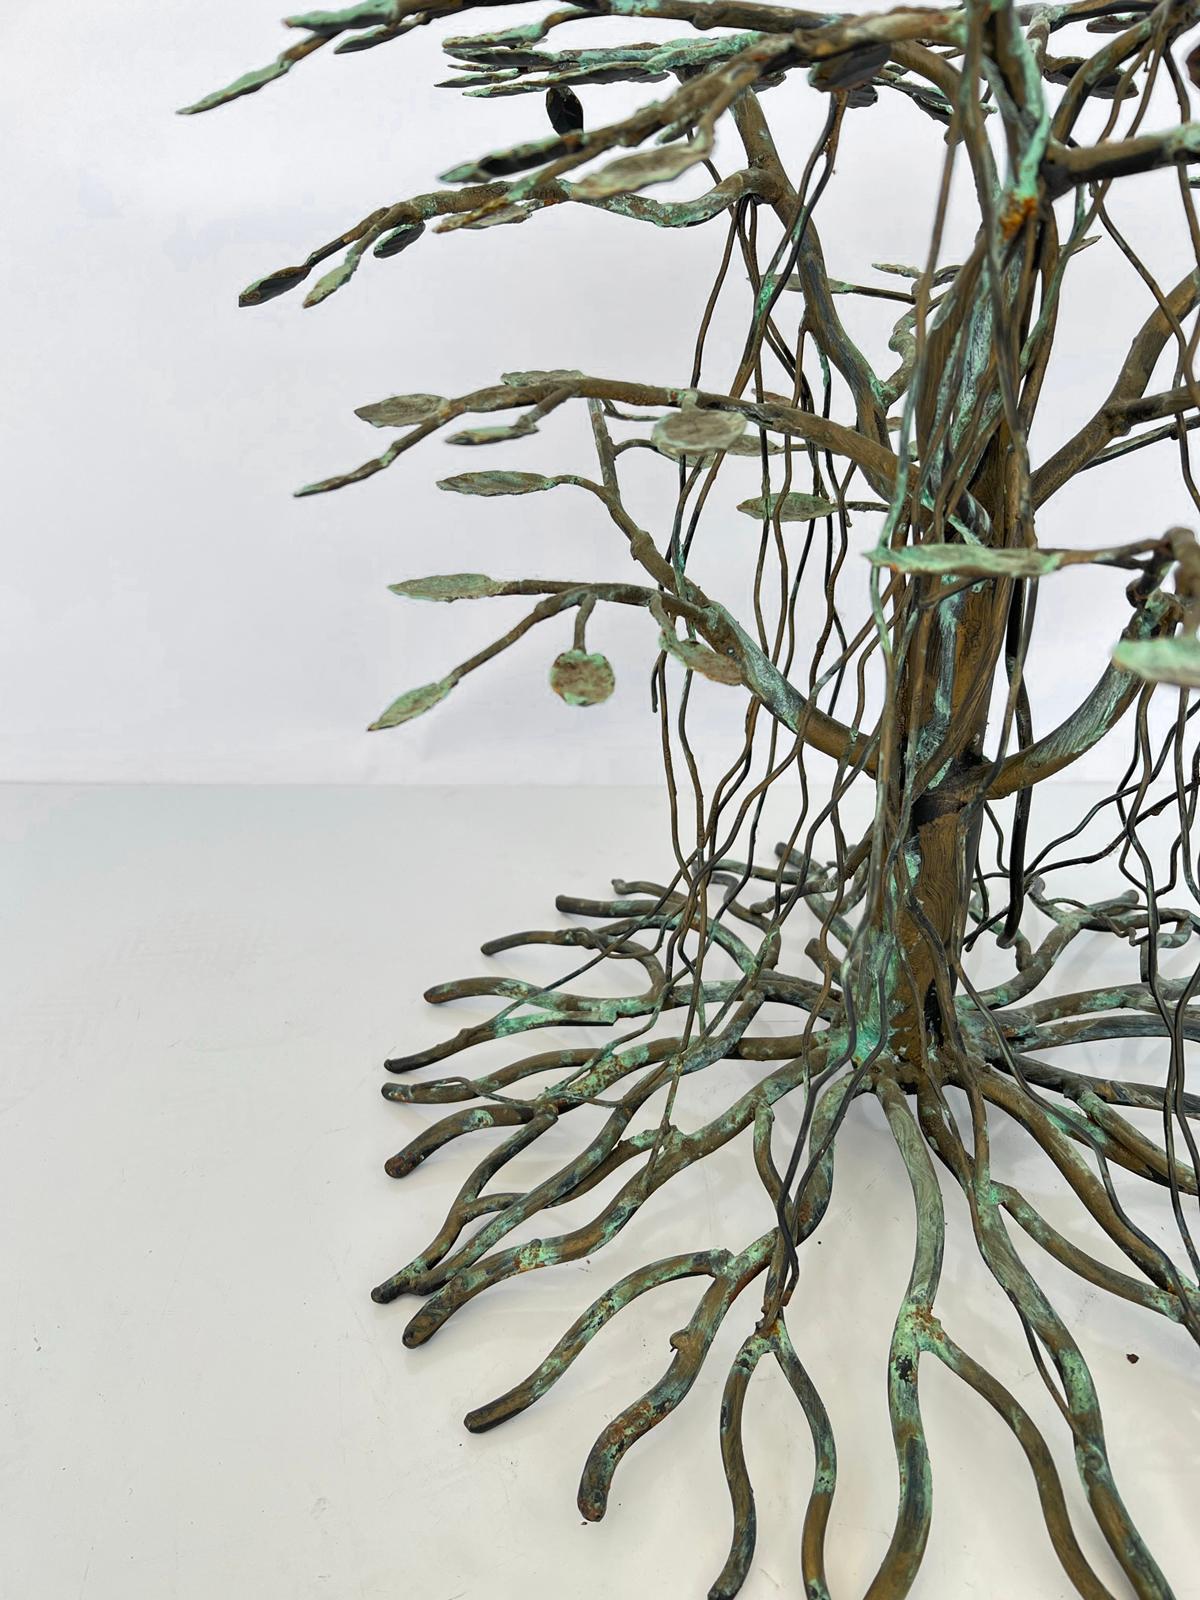 Signature arboreal accent table, having a round top of glass, on a base of welded bronze with a verdigris finish, fashioned as a stylized banyan tree. Its central trunk affixed with leafy branches, with ariel and ground roots, The table can work as